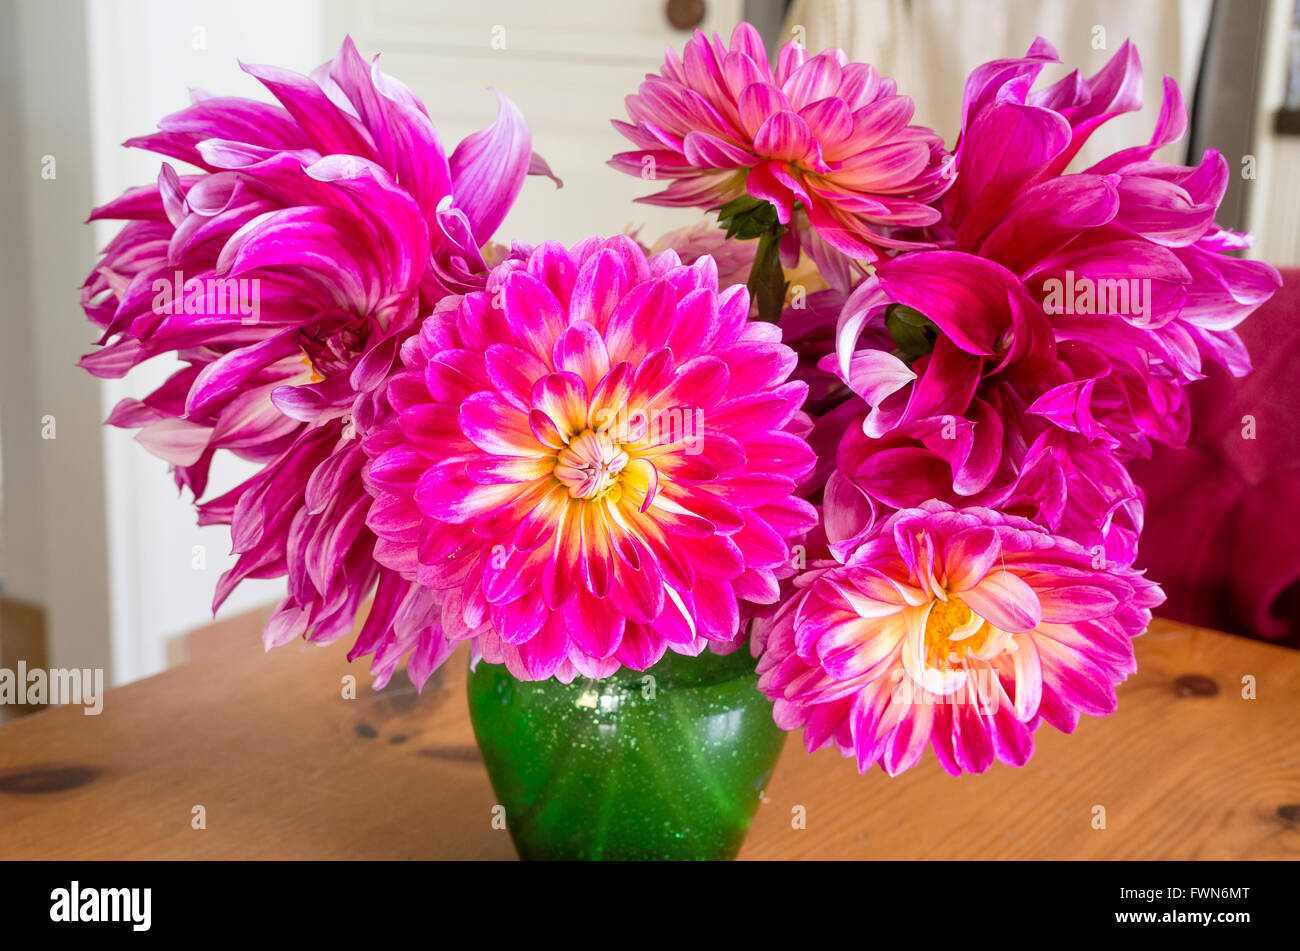 Decorative dahlias in a green vase indoors Stock Photo